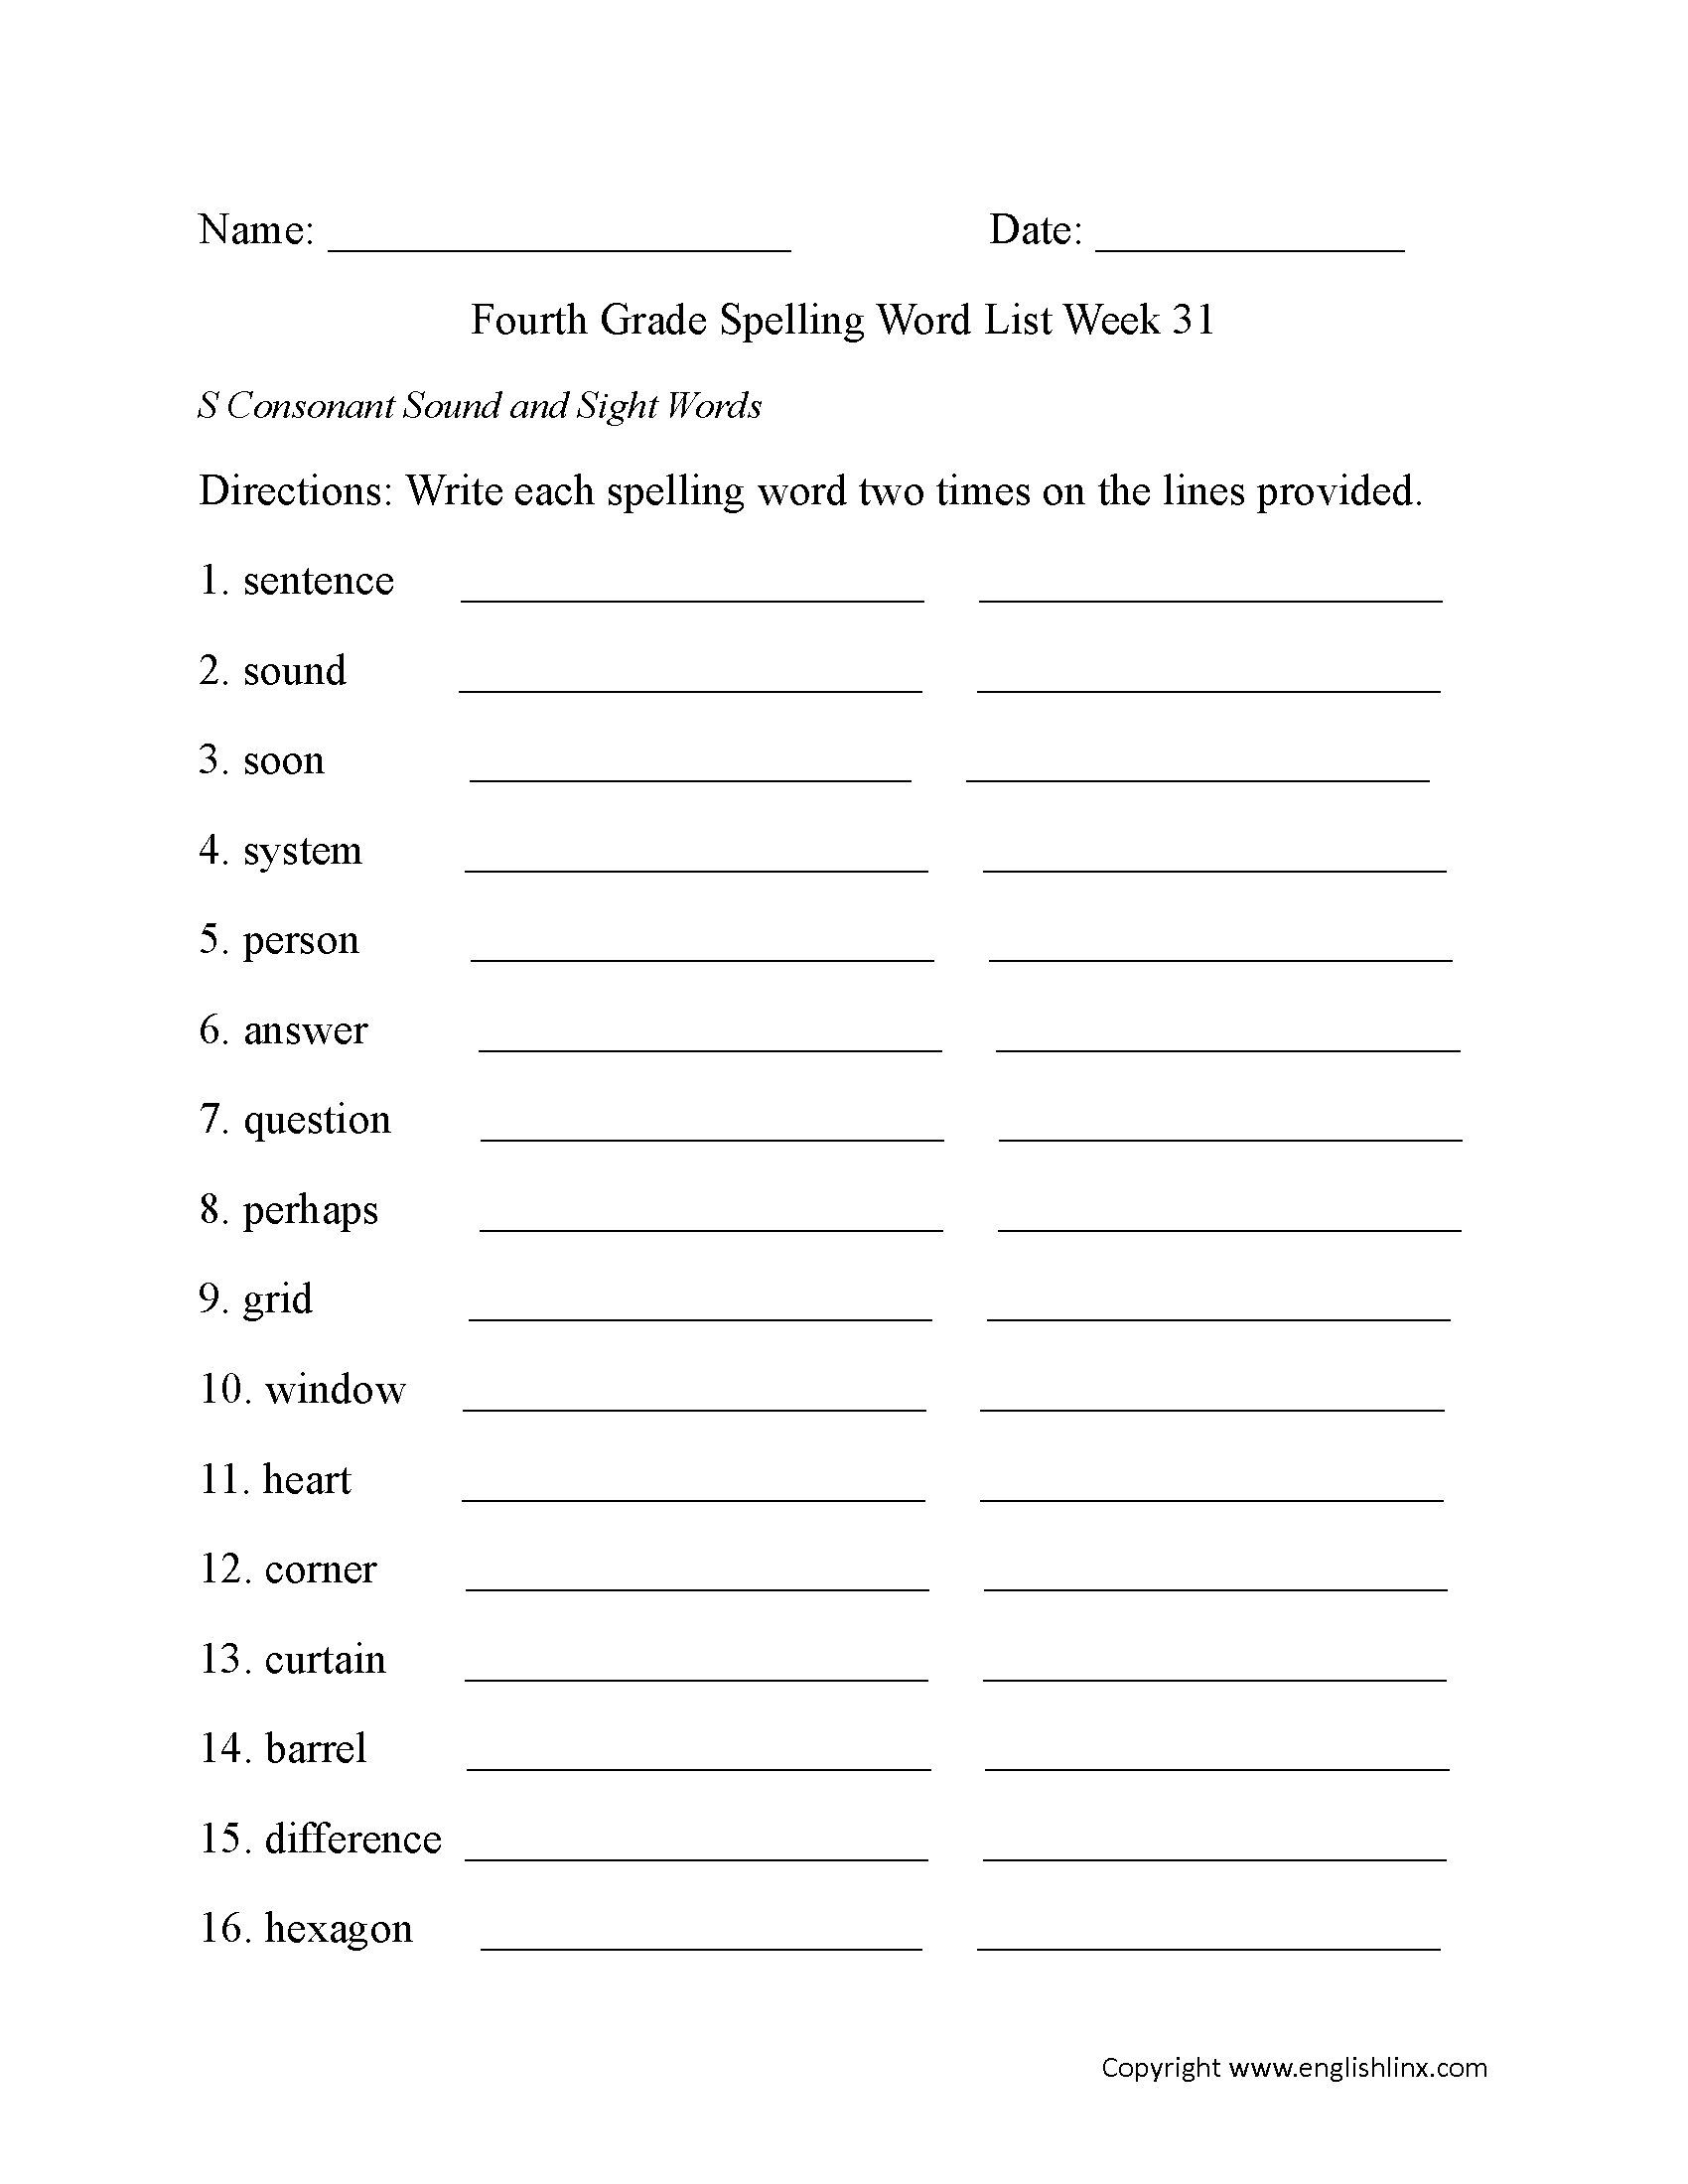 Week 31 S Consonant and Sight Words Fourth Grade Spelling Words Worksheets